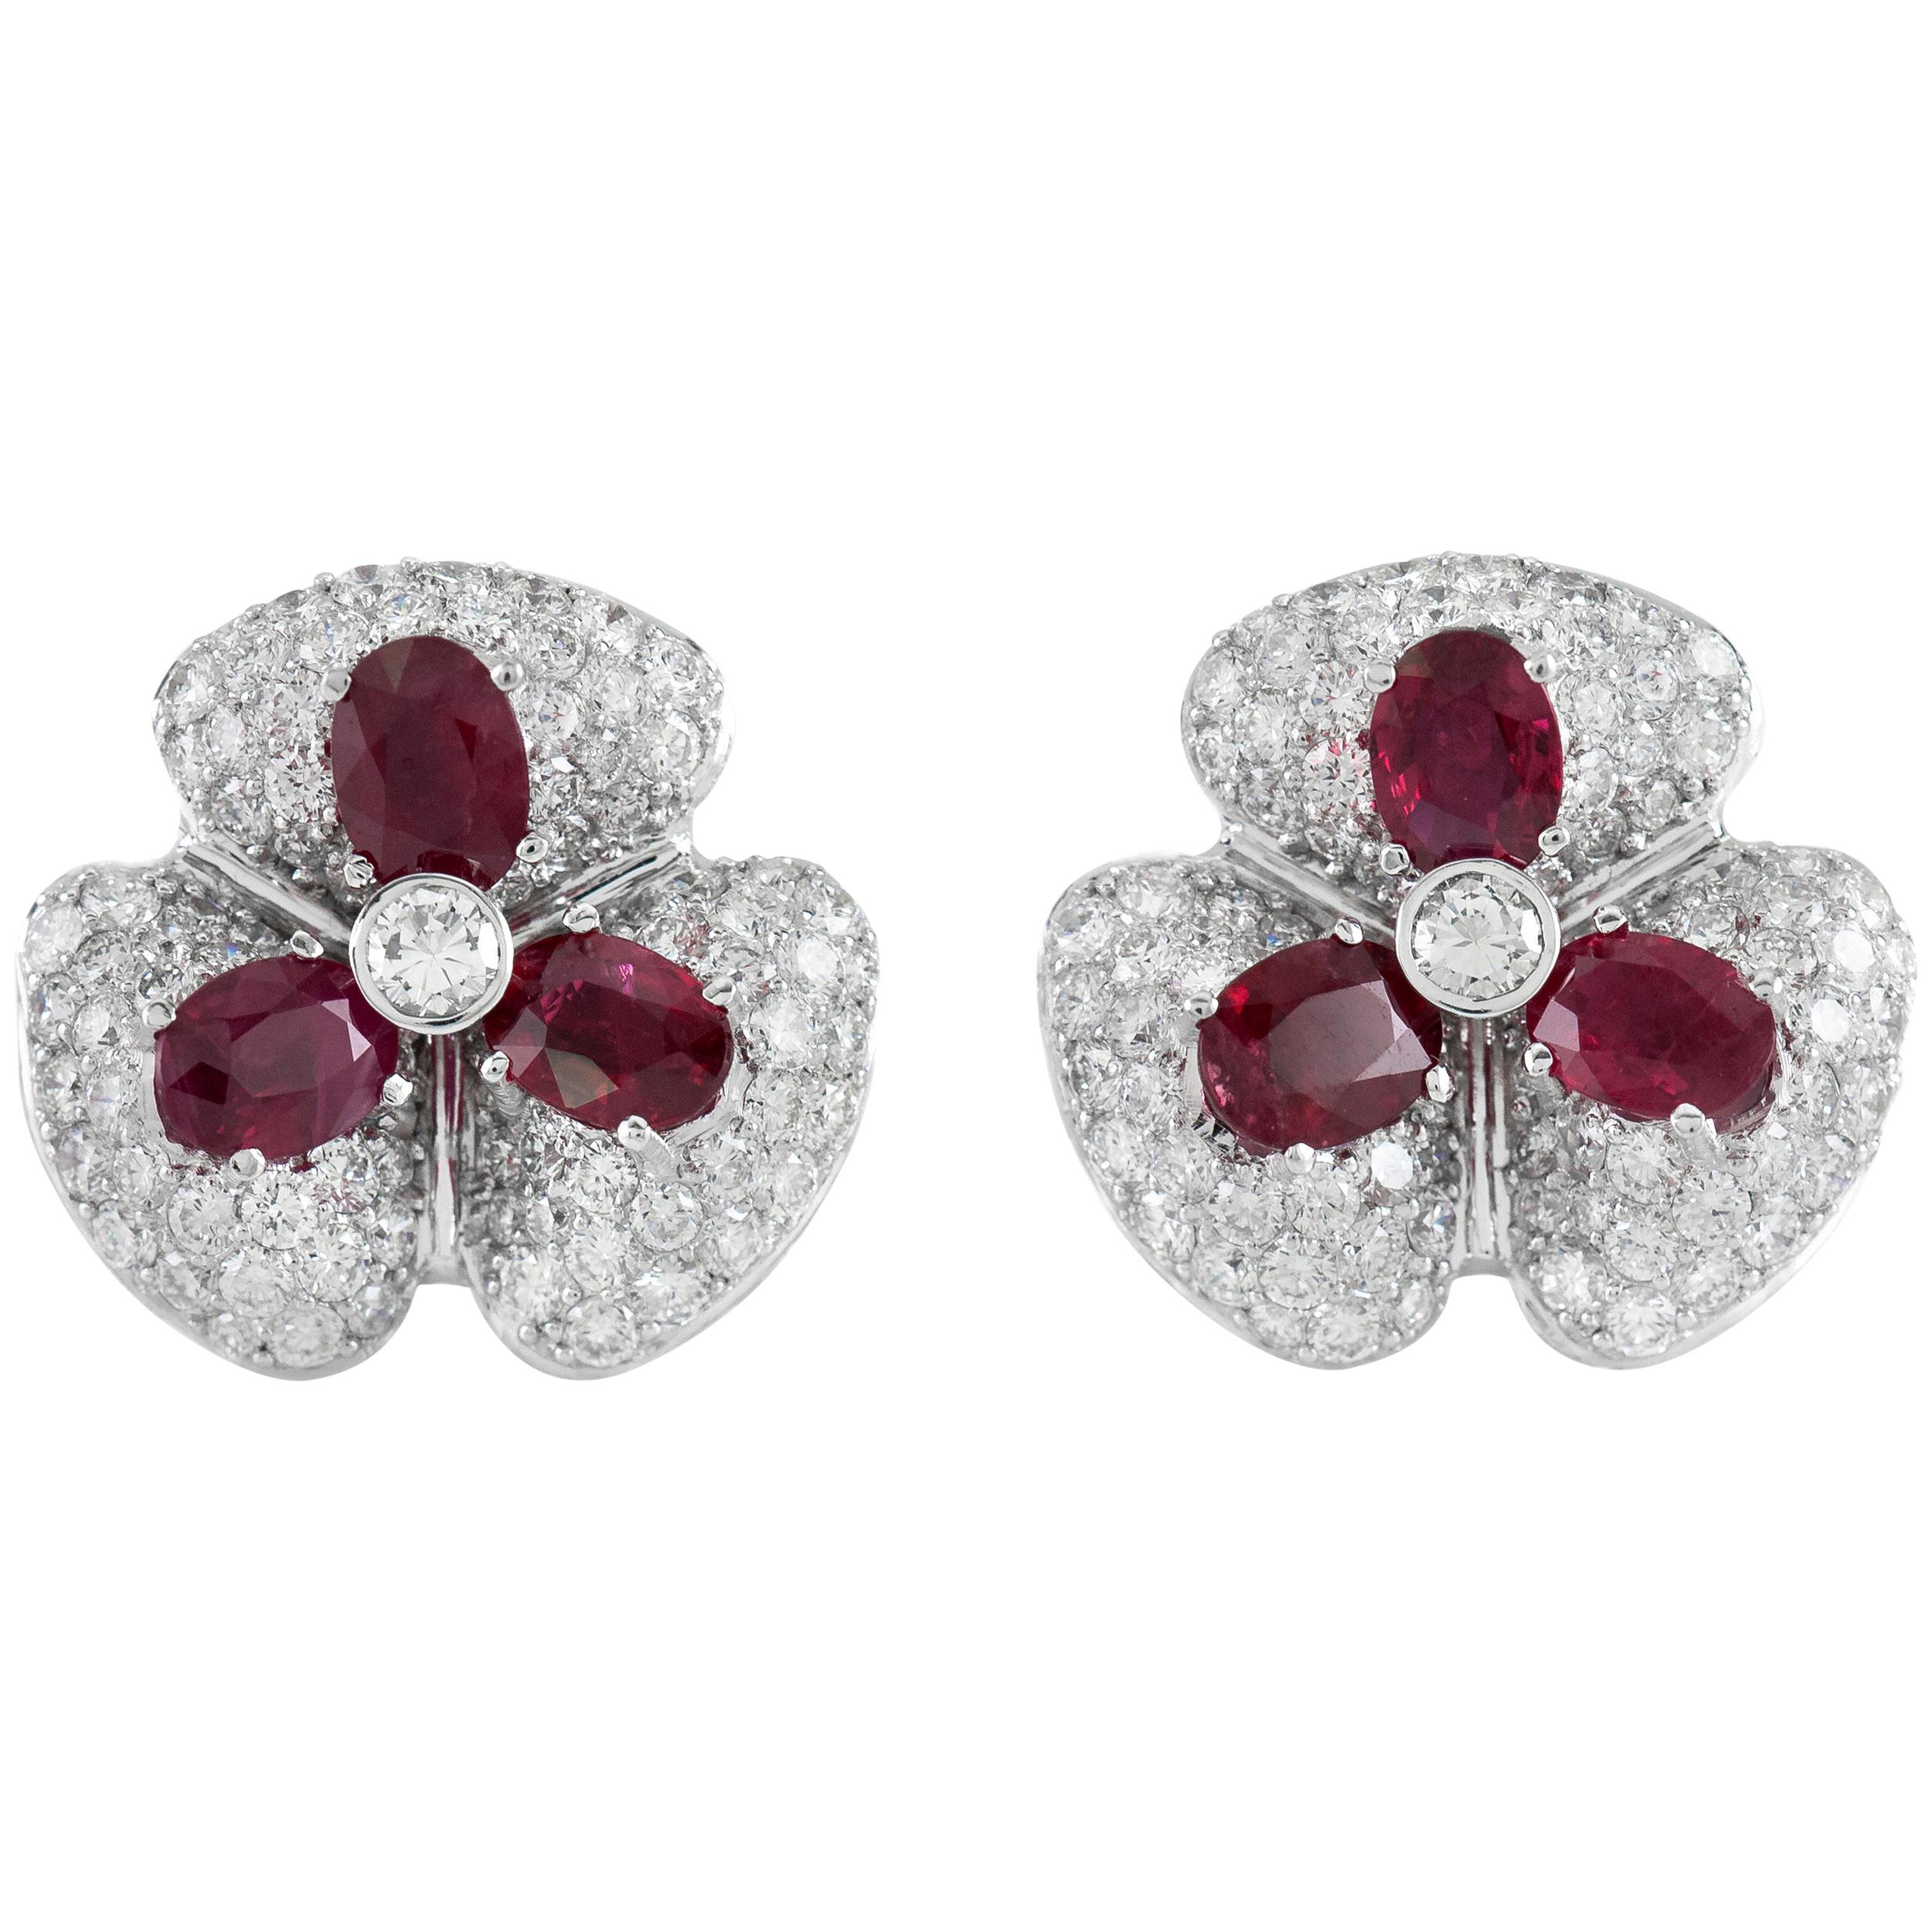 Beautiful 18 Karat White Gold Flower with Ruby and Diamonds Earrings